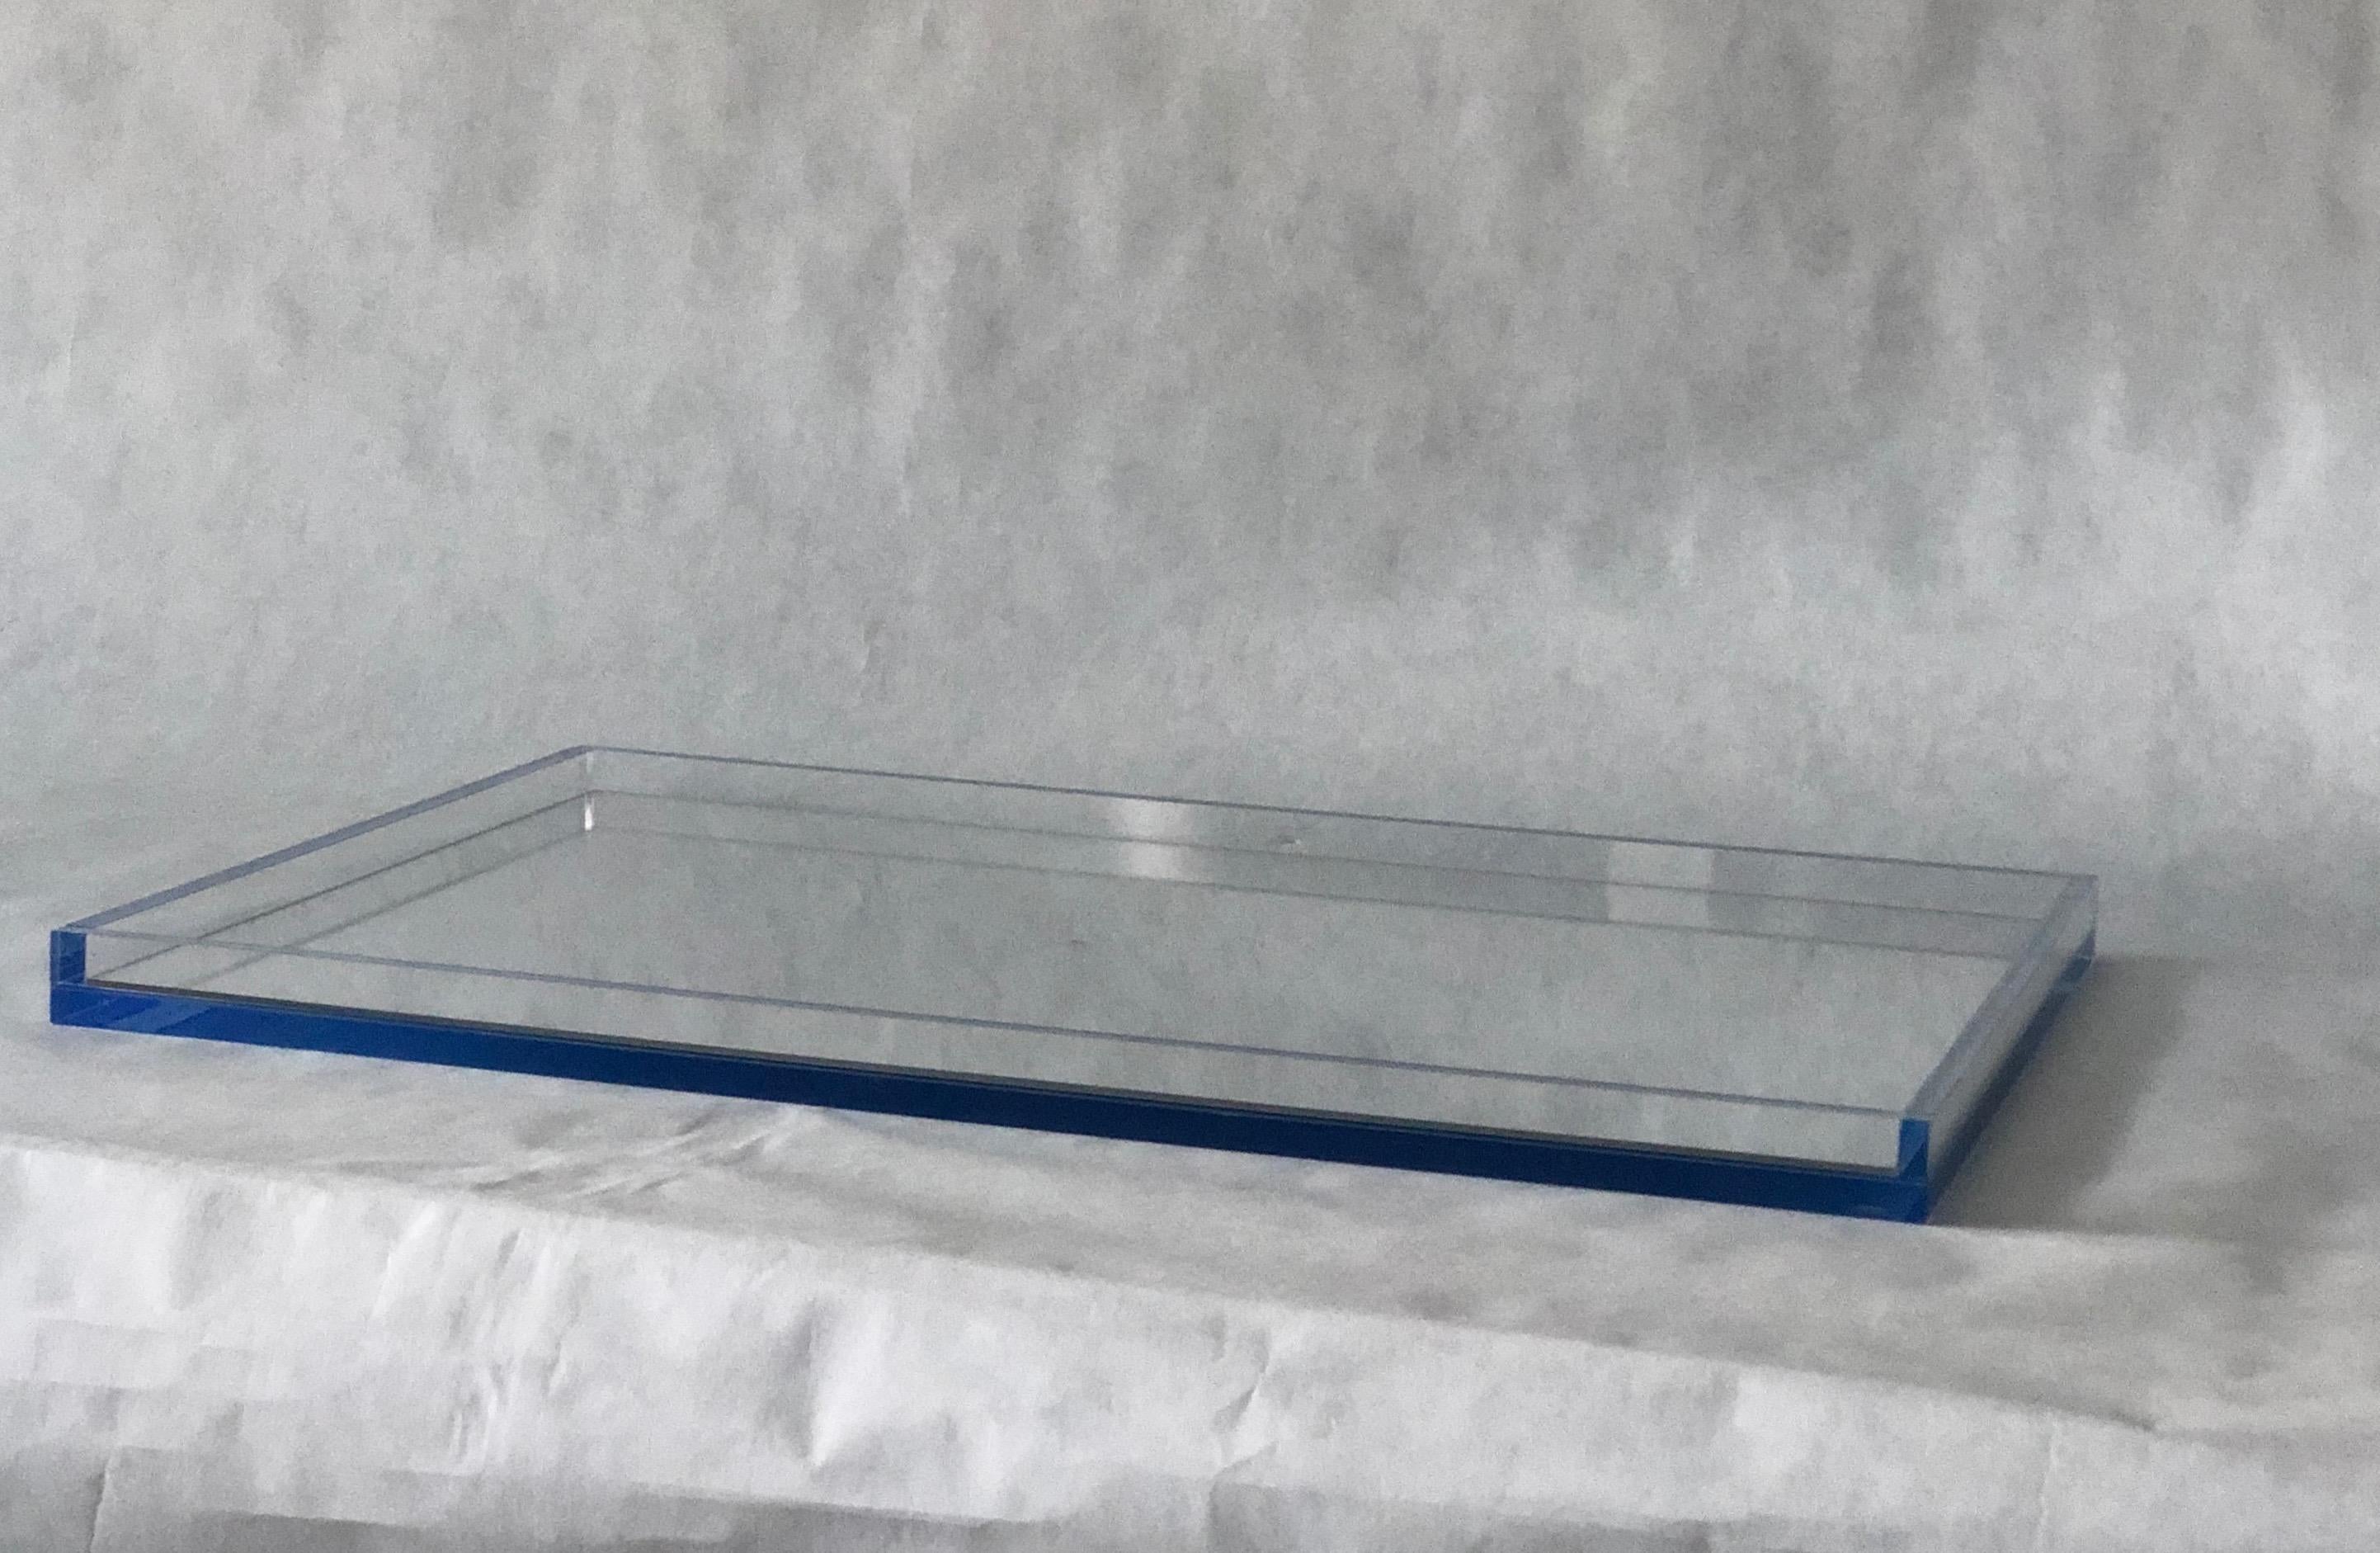 Contemporary Clear Lucite with Imbedded Blue Border and Mirror Base Decorative Serving Tray